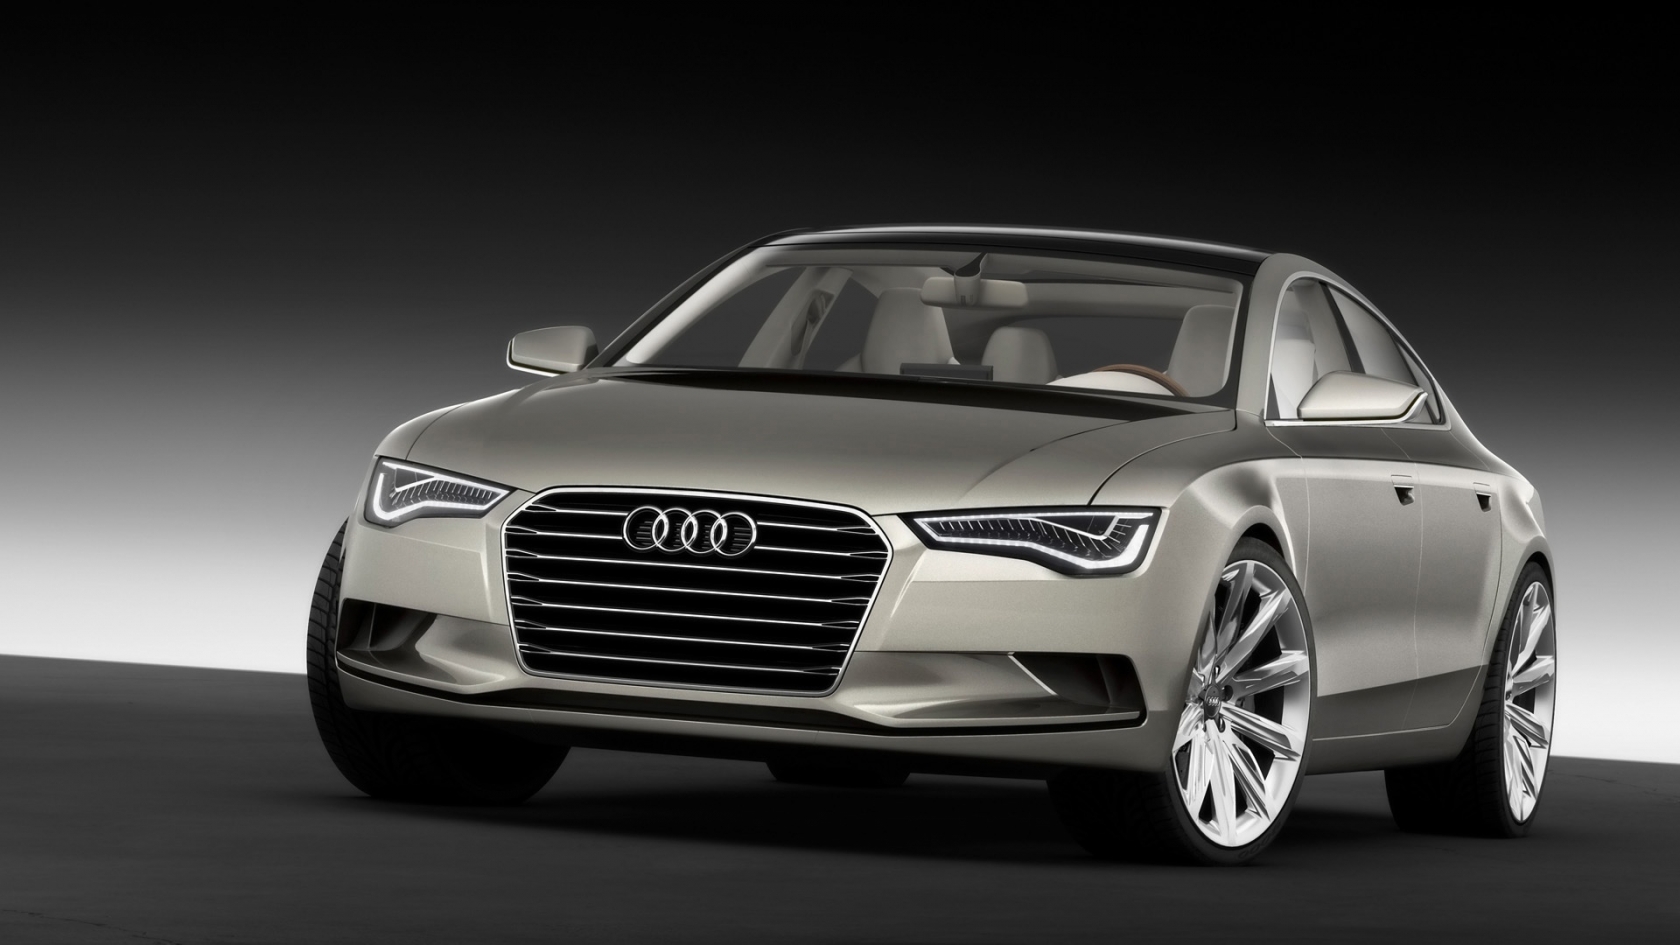 2009 Audi Sportback Concept - Front Angle for 1680 x 945 HDTV resolution